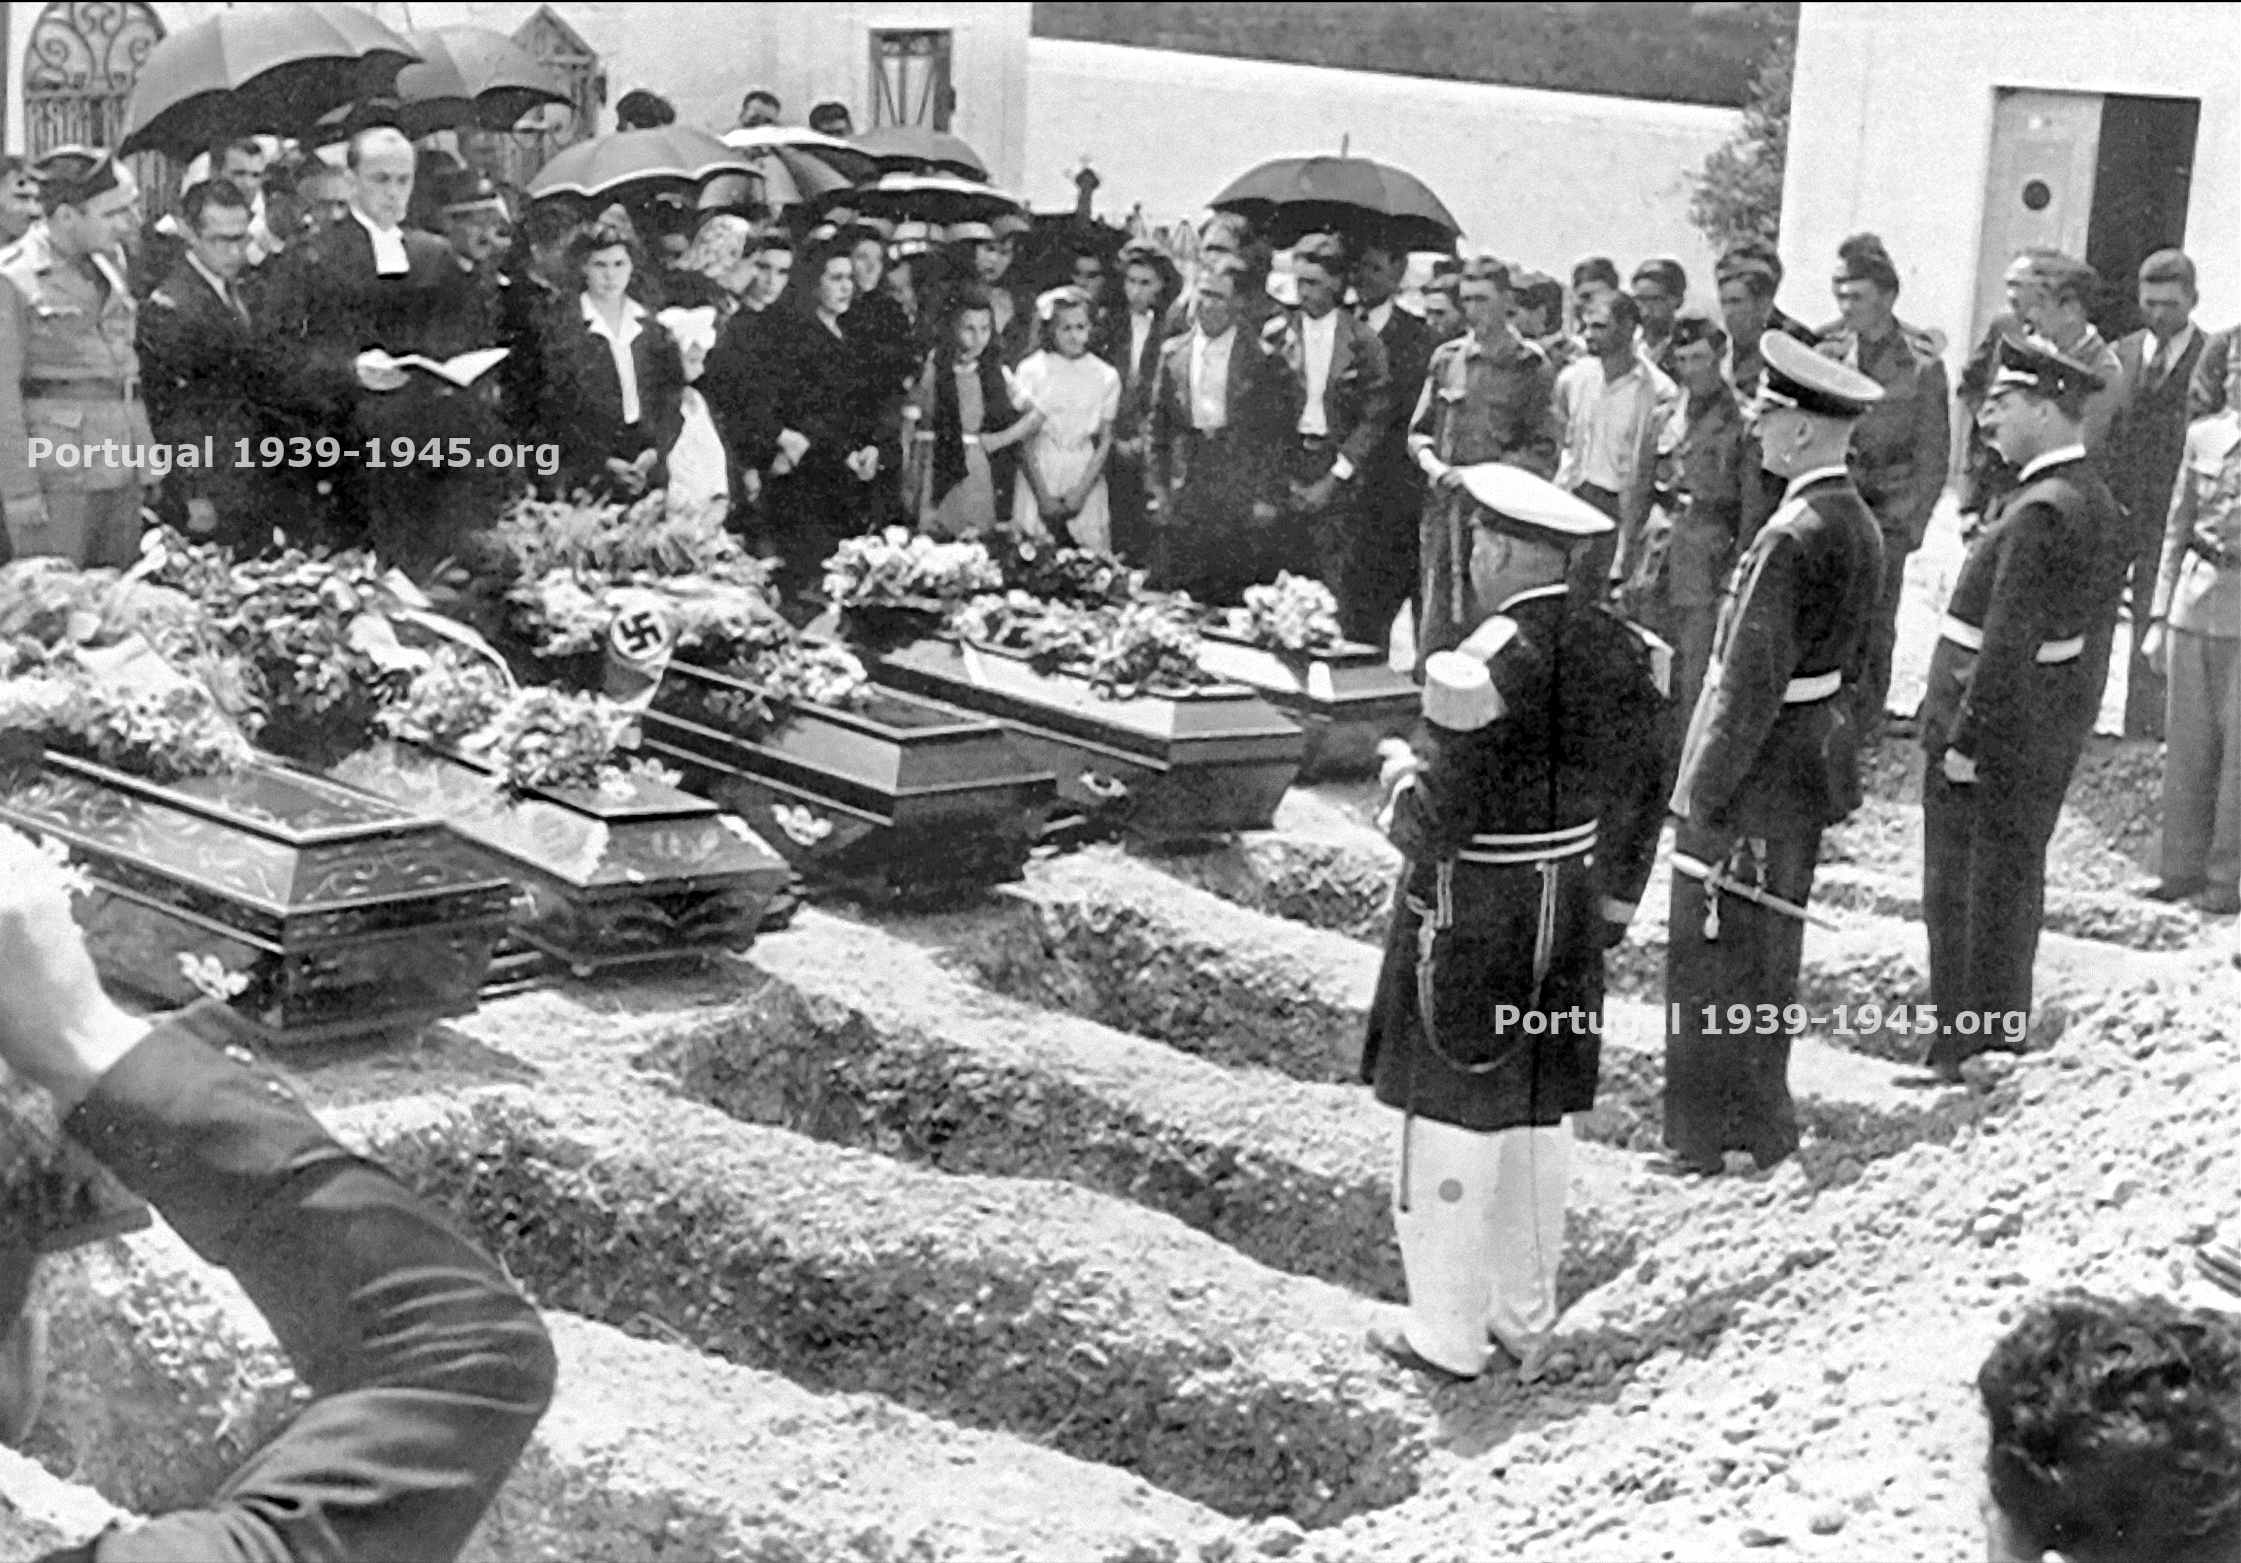 Funeral of the German airmen in the Aljezur cemetery 